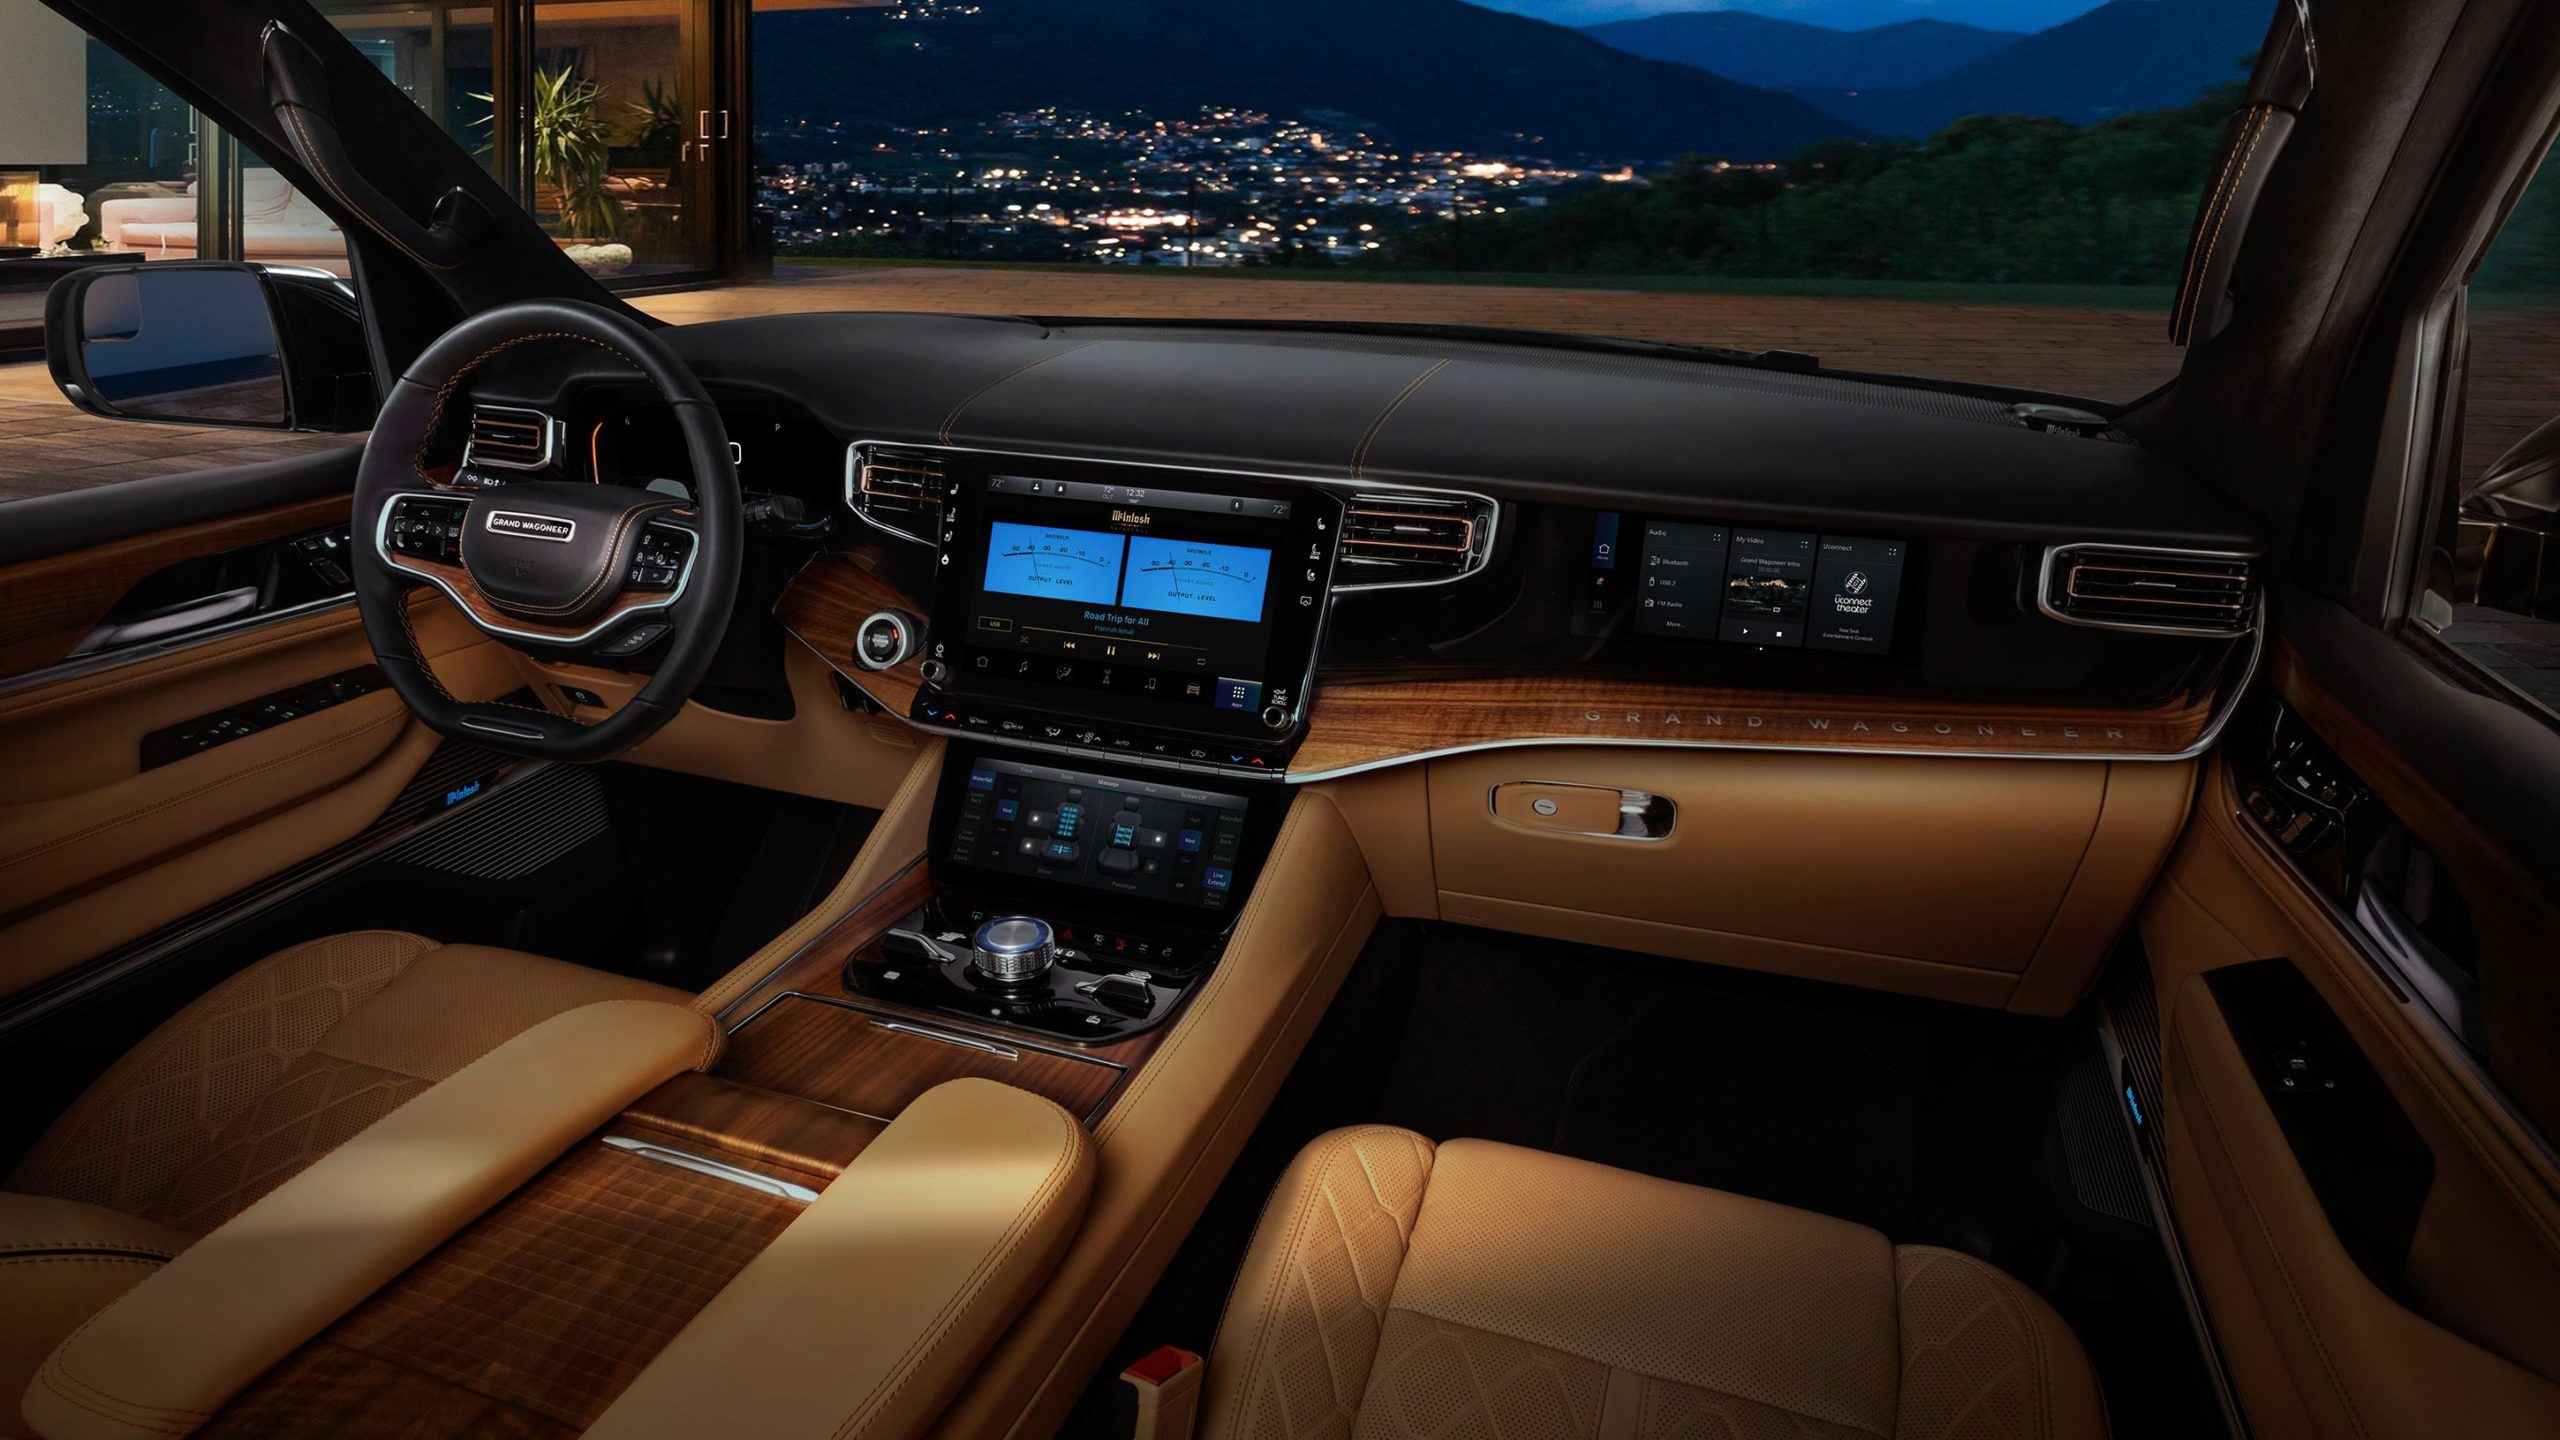 mcintosh’s-reference-car-audio-system-revealed-in-2022-jeep-grand-wagoneer